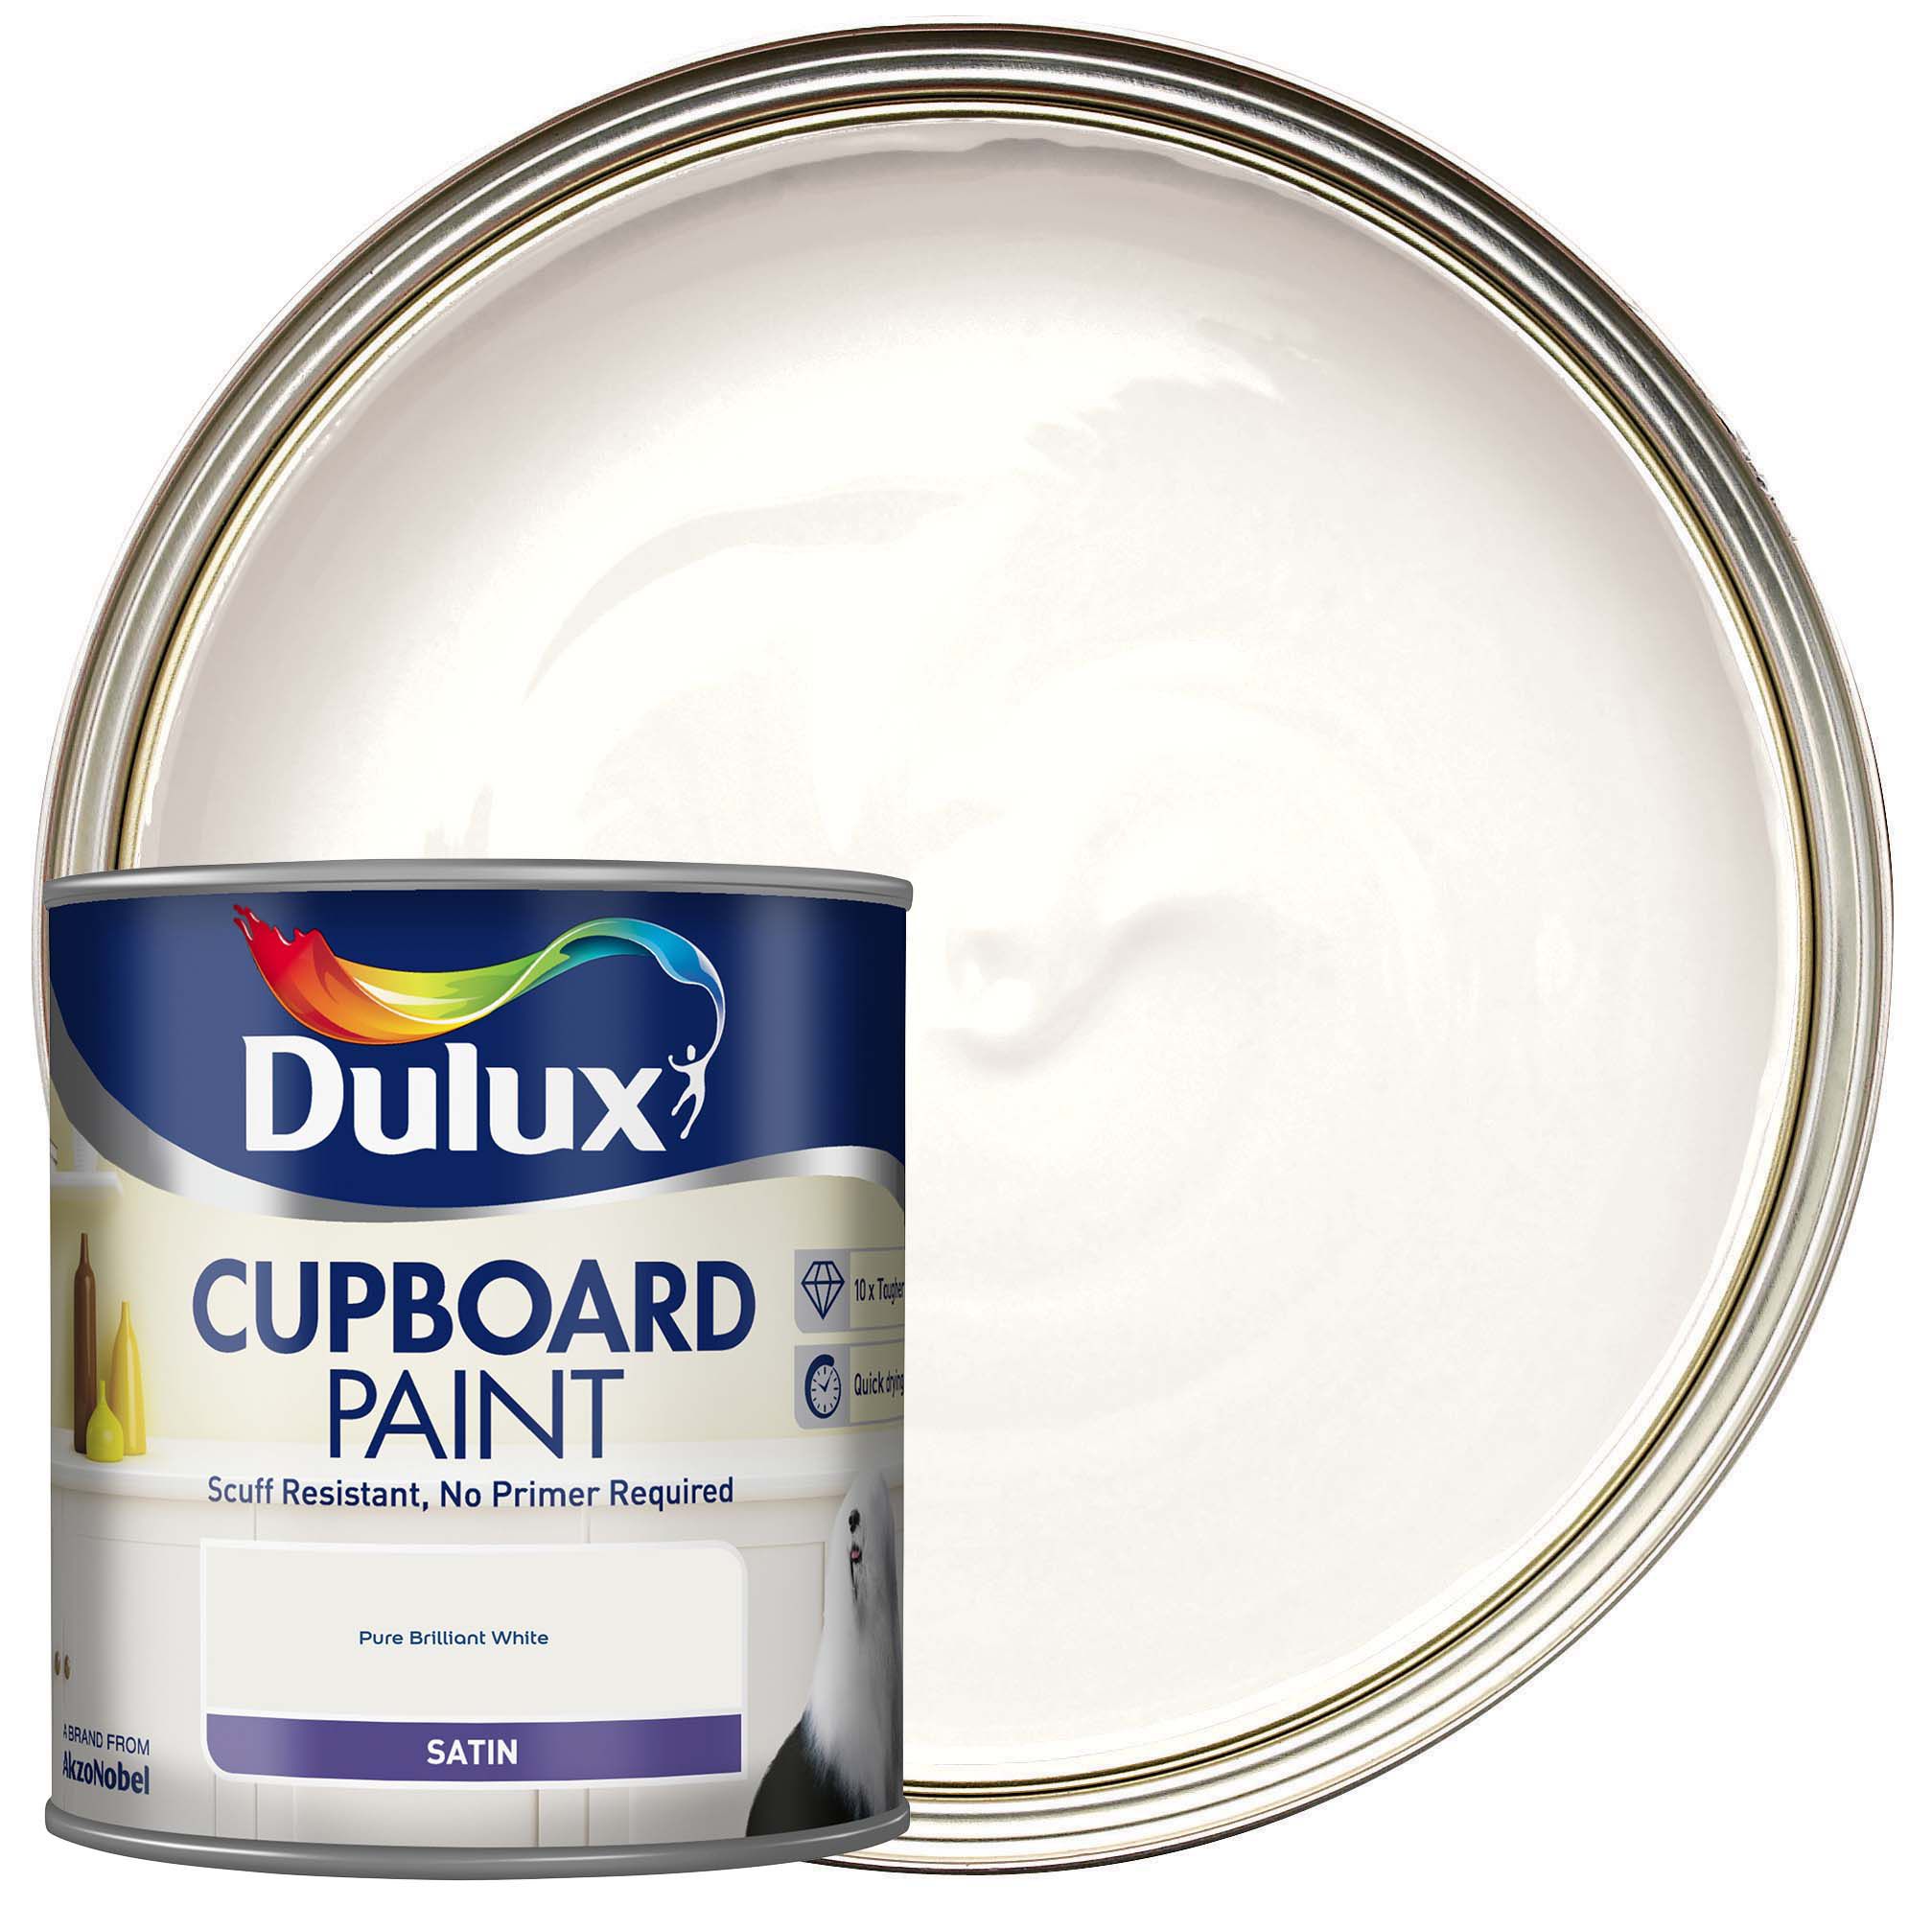 Image of Dulux Cupboard Paint - Pure Brilliant White - 600ml